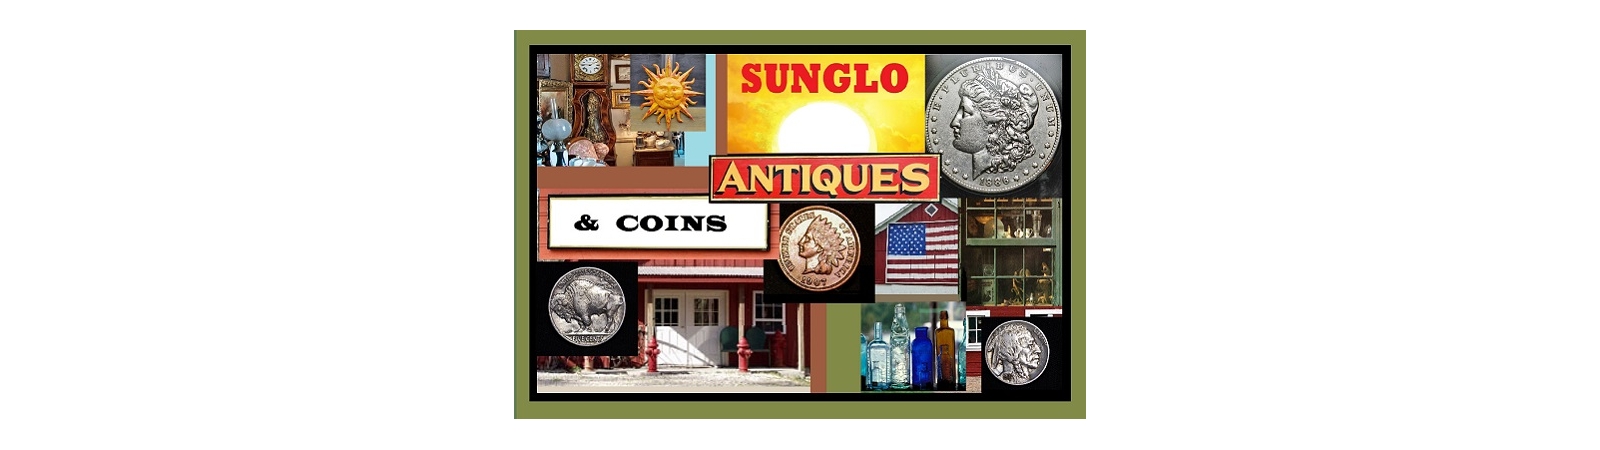 Sunglo Antiques & Coins (We Ship!) | AuctionNinja